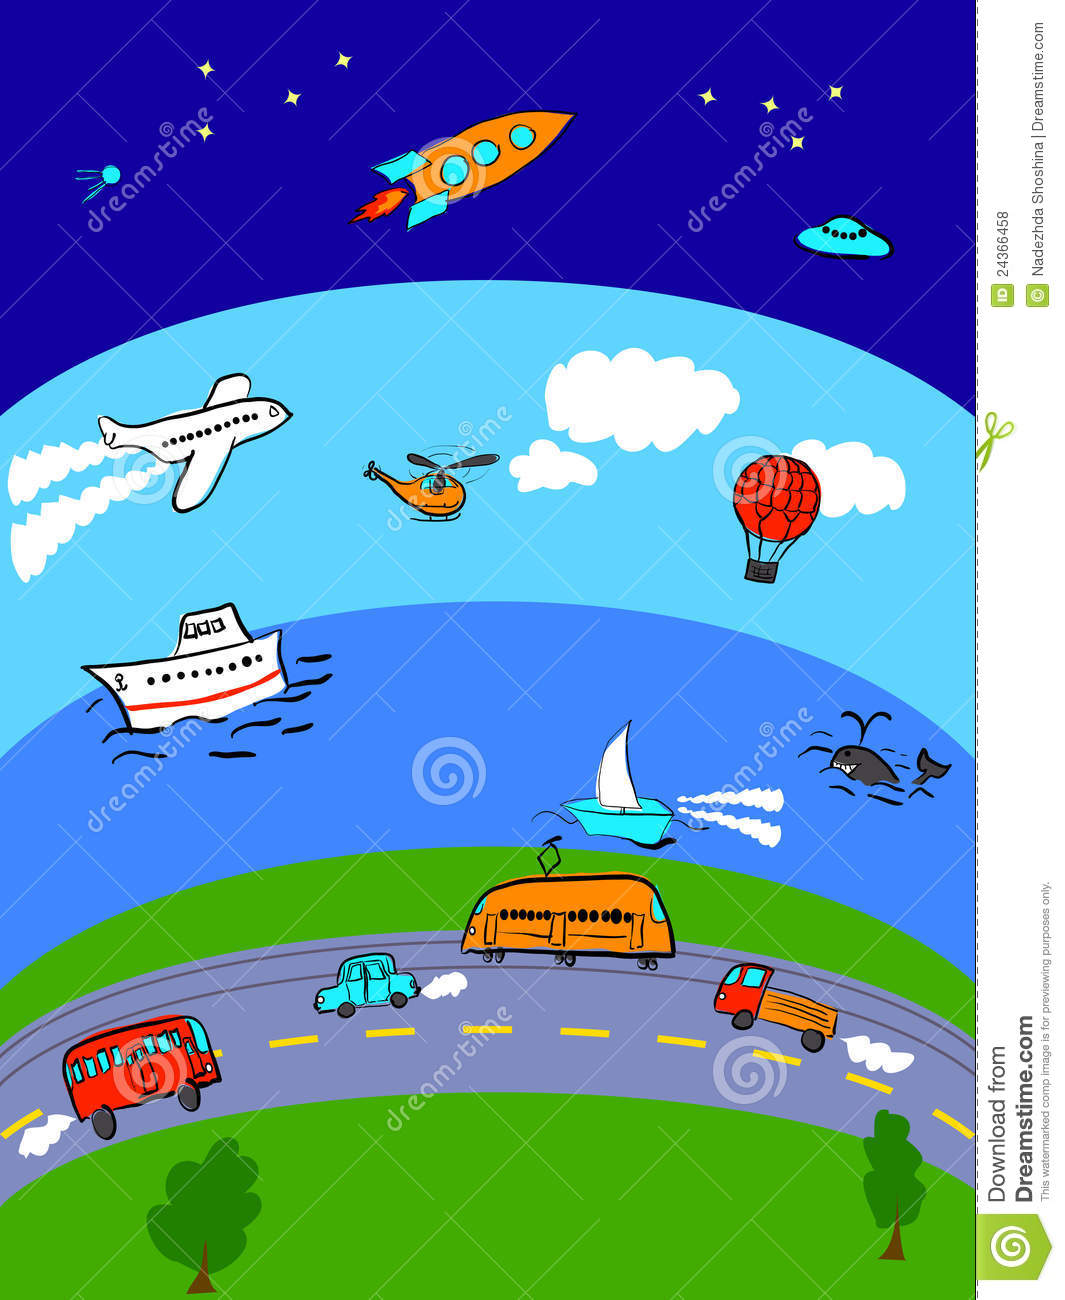 Means Of Transportation Royalty Free Stock Photos   Image  24366458